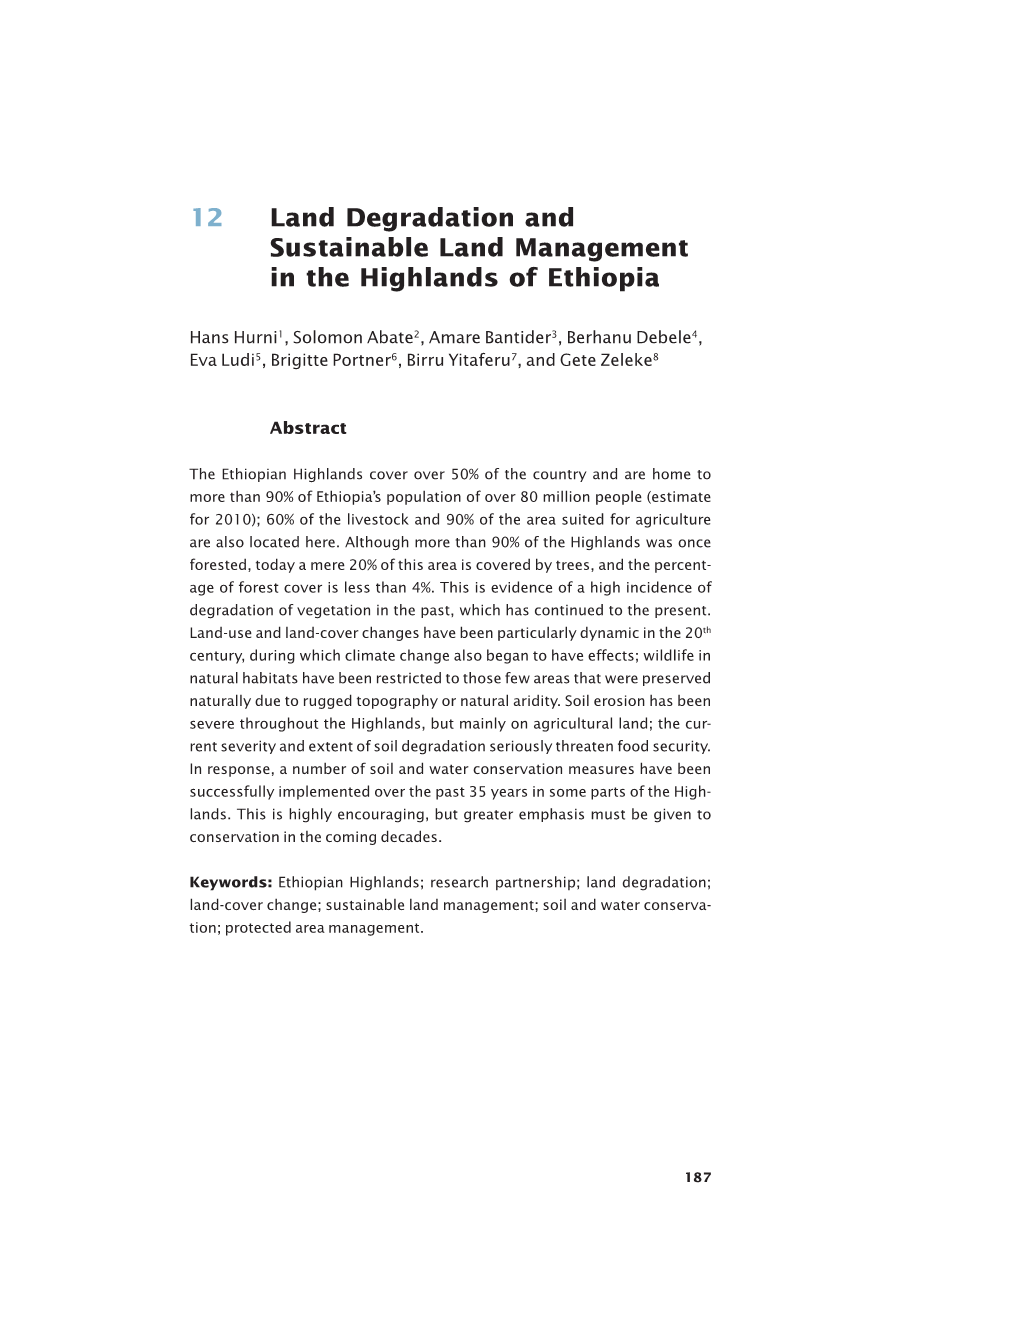 Land Degradation and Sustainable Land Management in the Highlands of Ethiopia